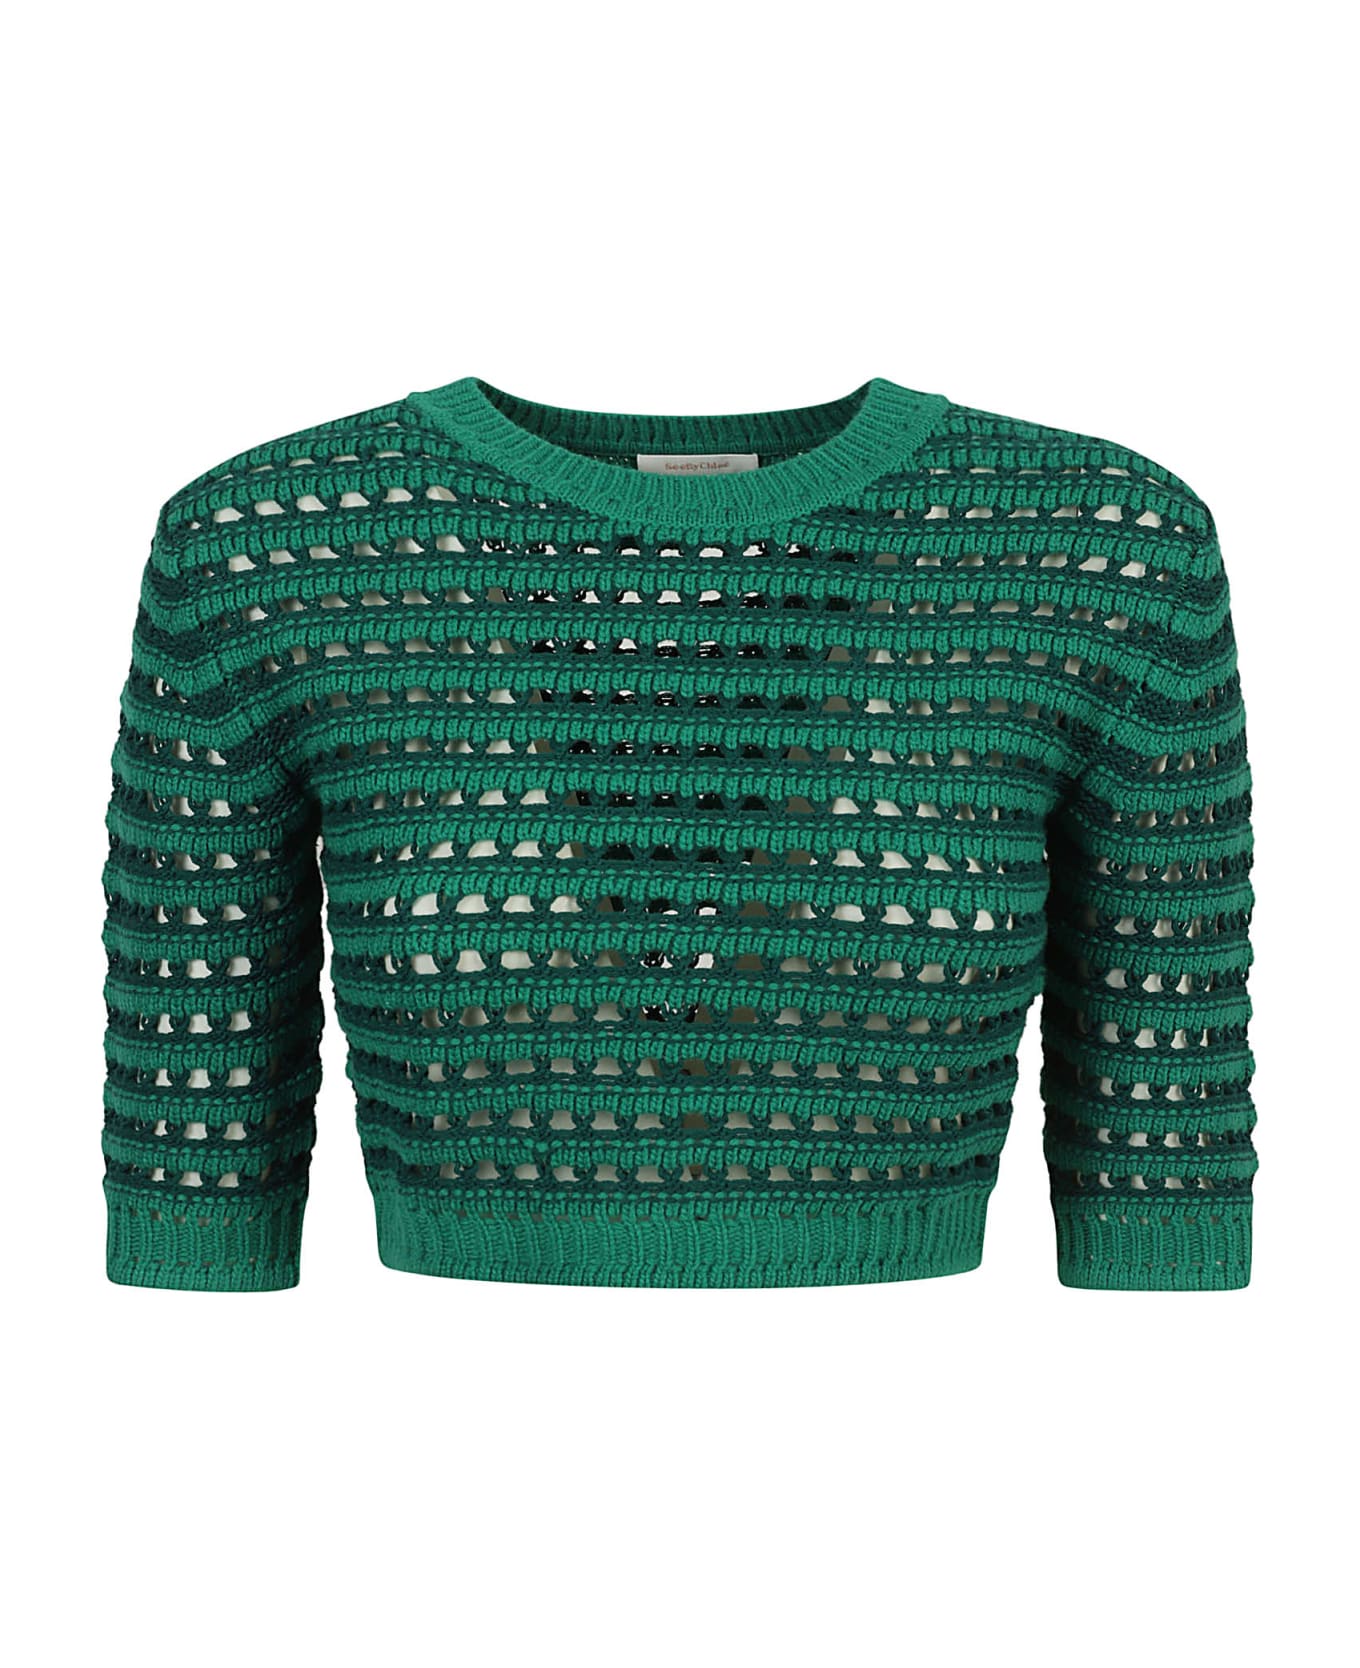 See by Chloé Cropped Crochet Top - Lively Pine